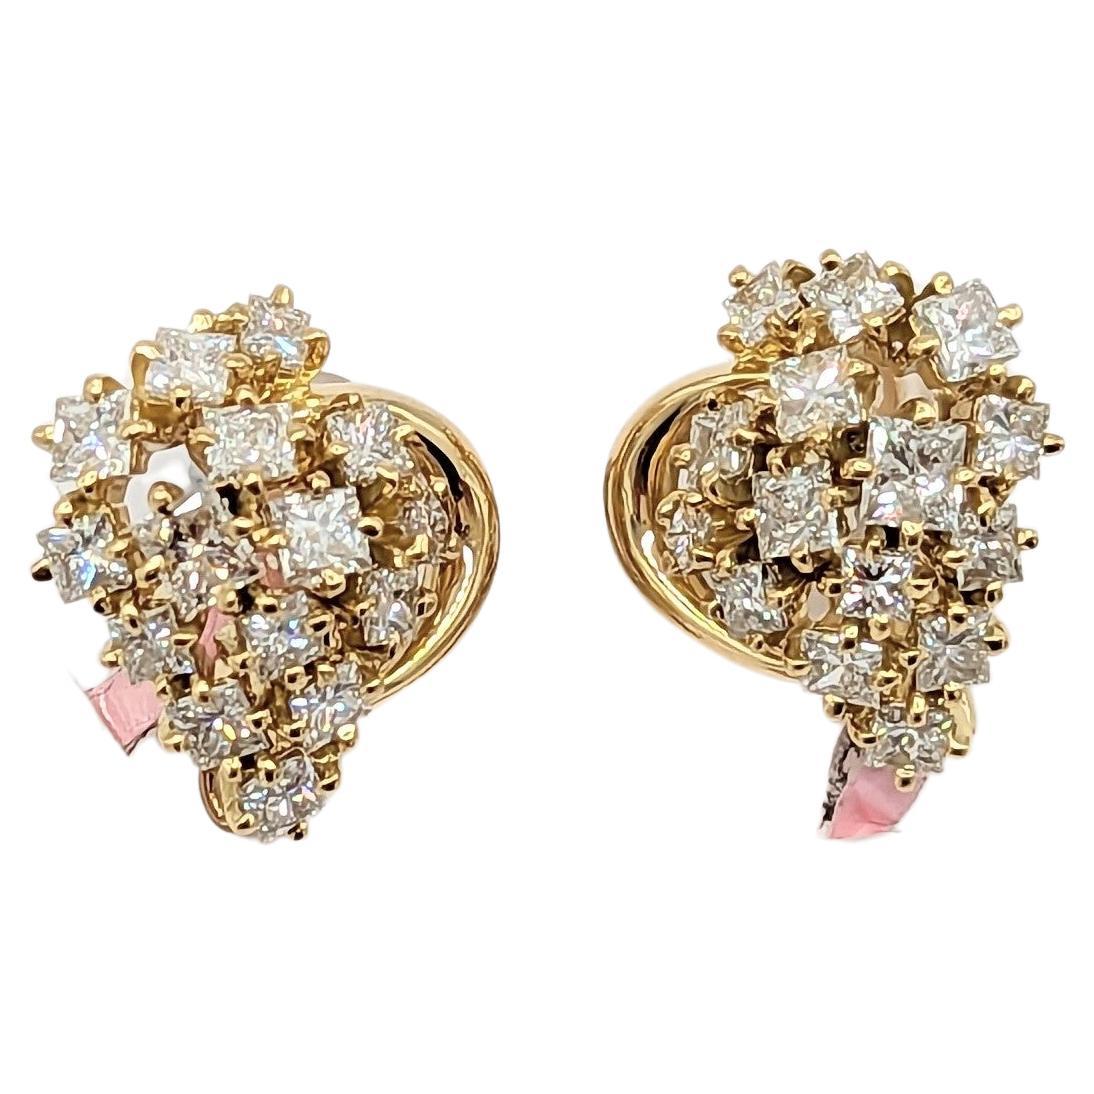 White Diamond Cluster Earrings in 18K Yellow Gold For Sale